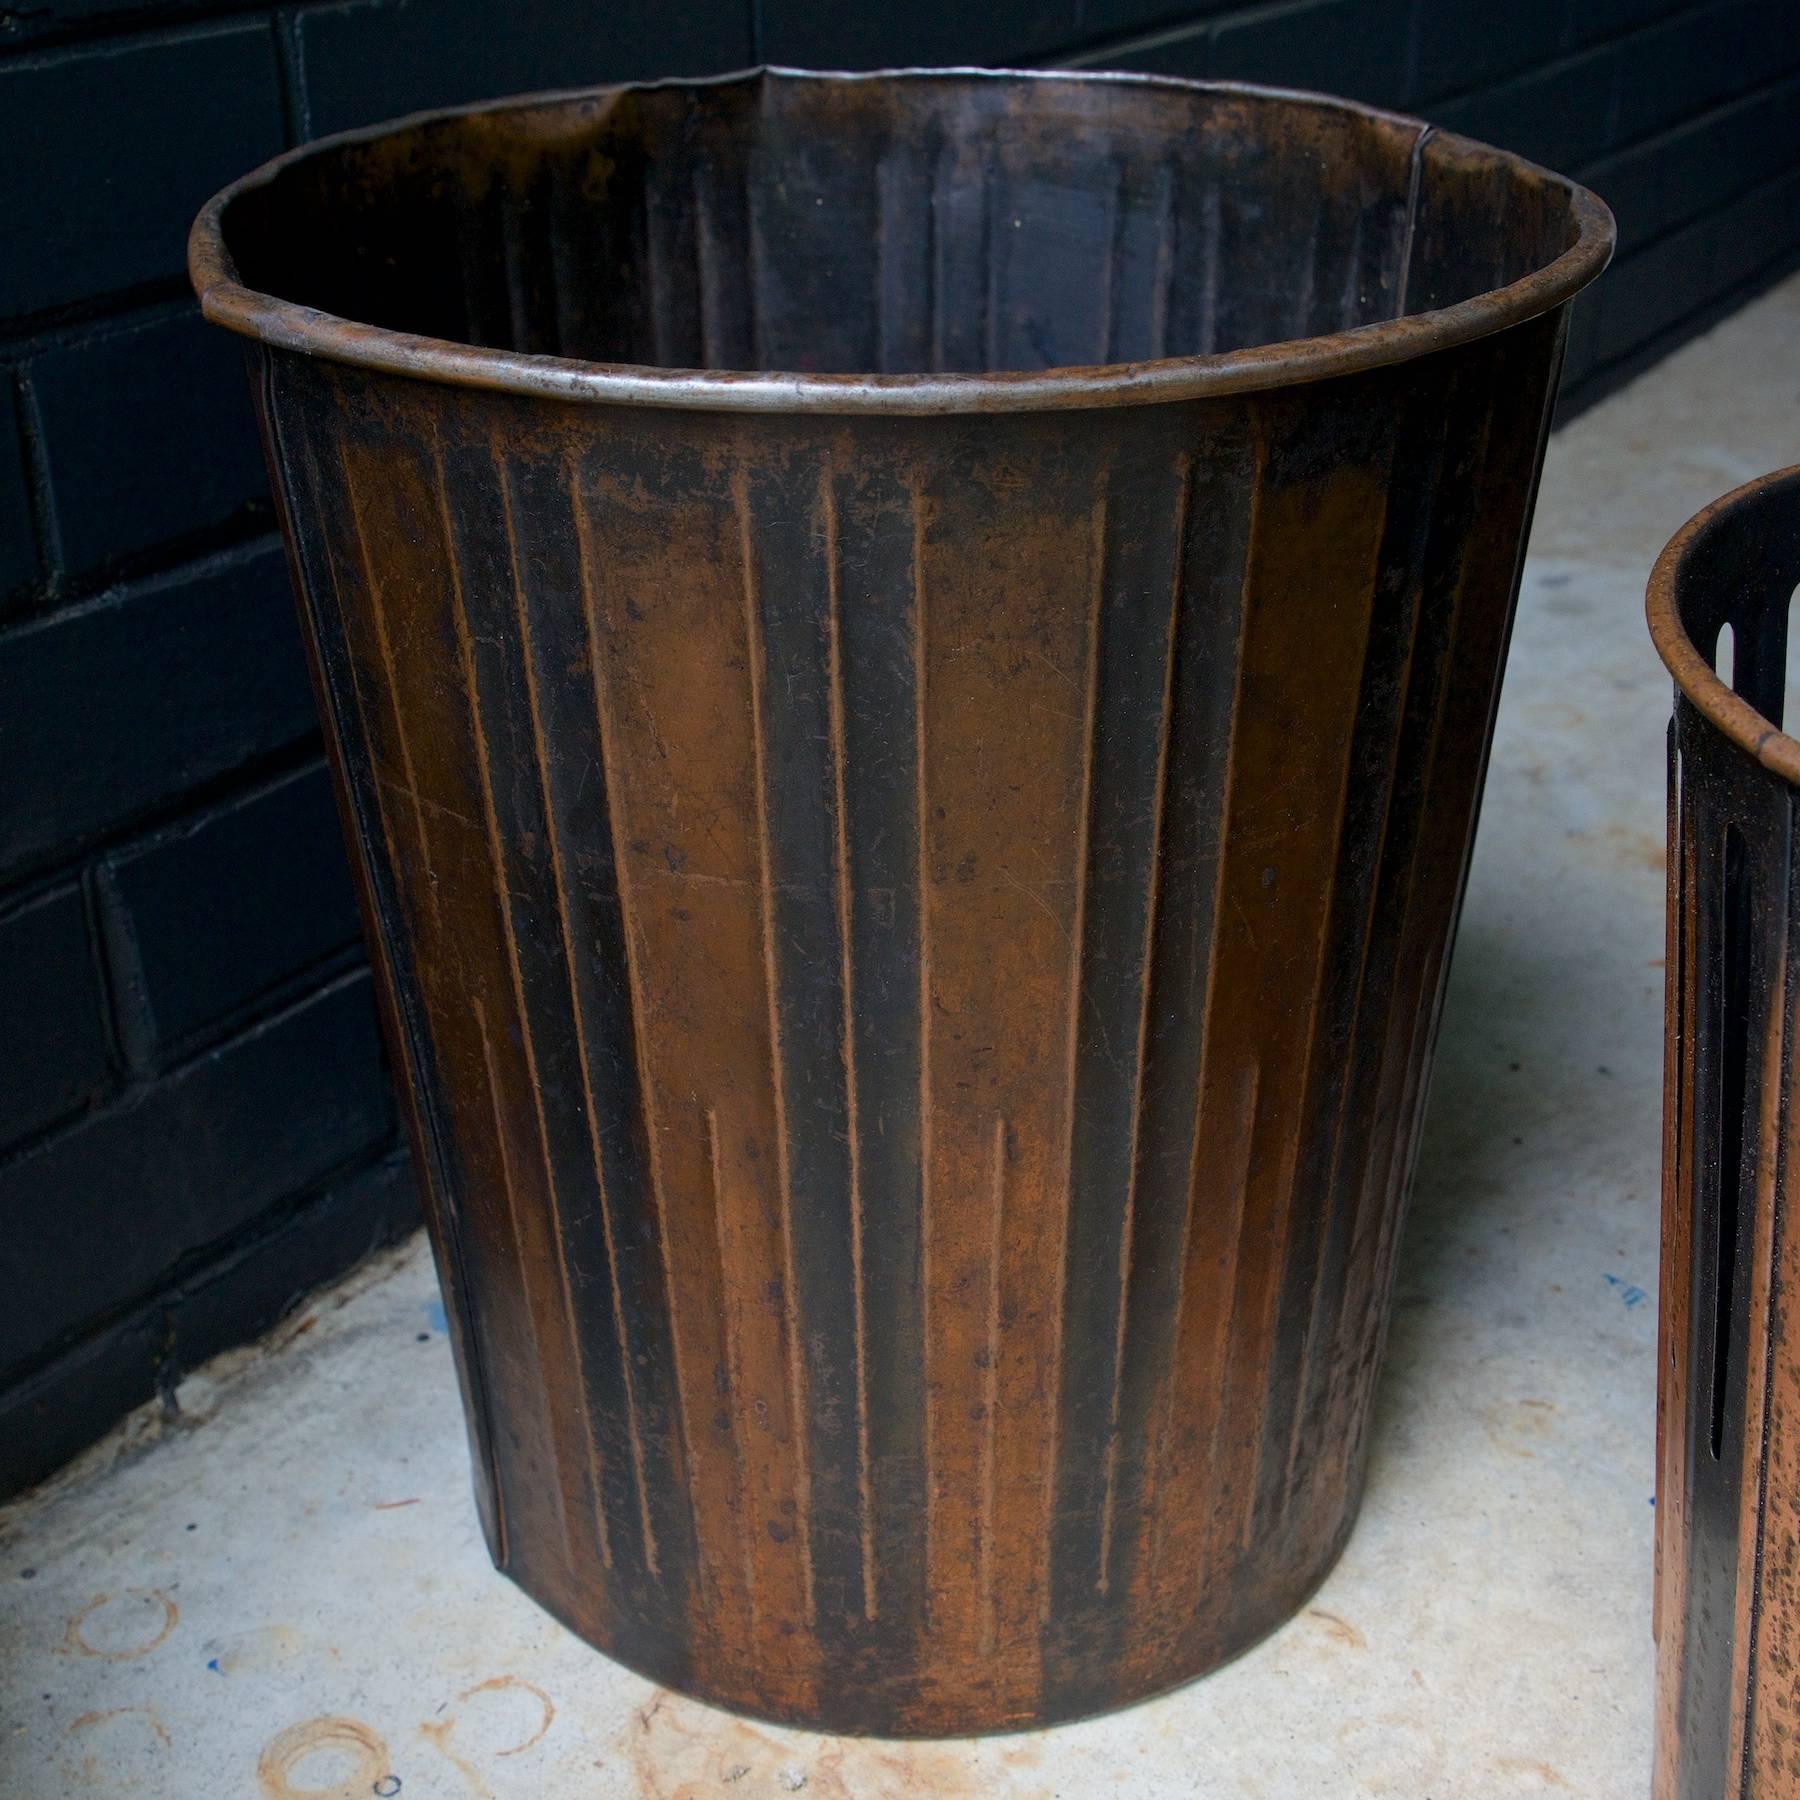 Japanned finished copper factory office trash cans wastebaskets. Measures: Two large D 13.25 x H 14.25 in.
One small D 11.25 x H 12.25 in.